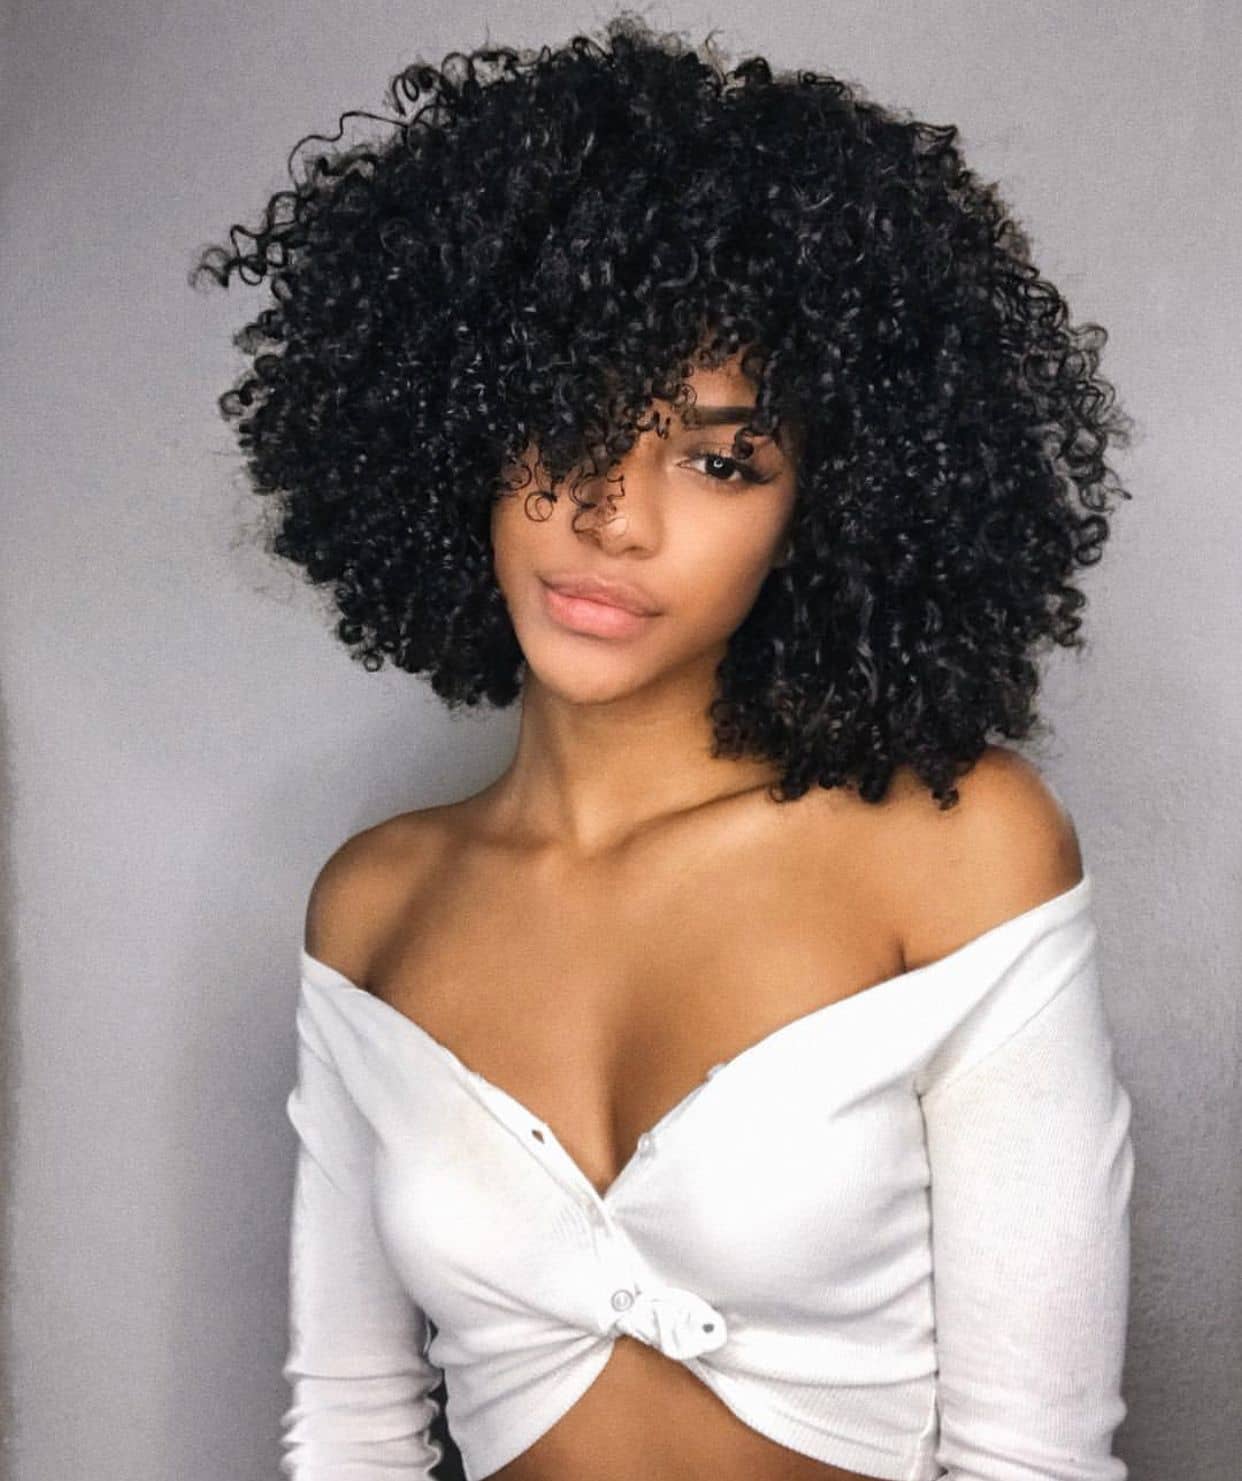 https://thecuddl.com/haircuts-for-curly-hair-ideas-designs/